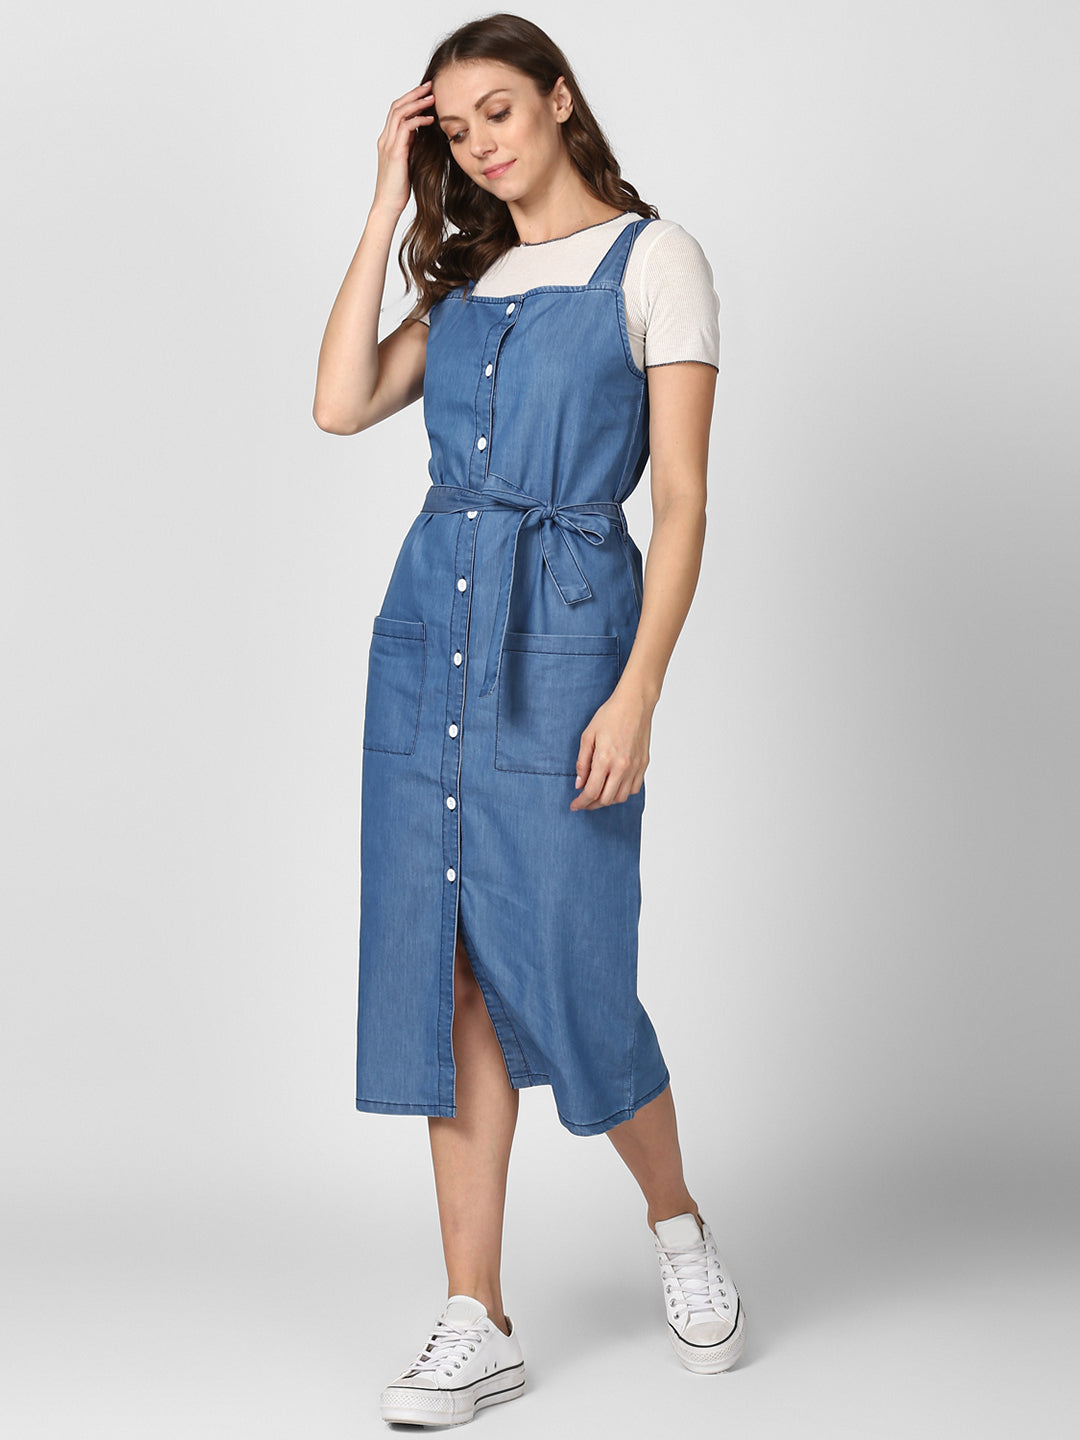 Denim Dress Outfit w. Belt for Women | Luci's Morsels